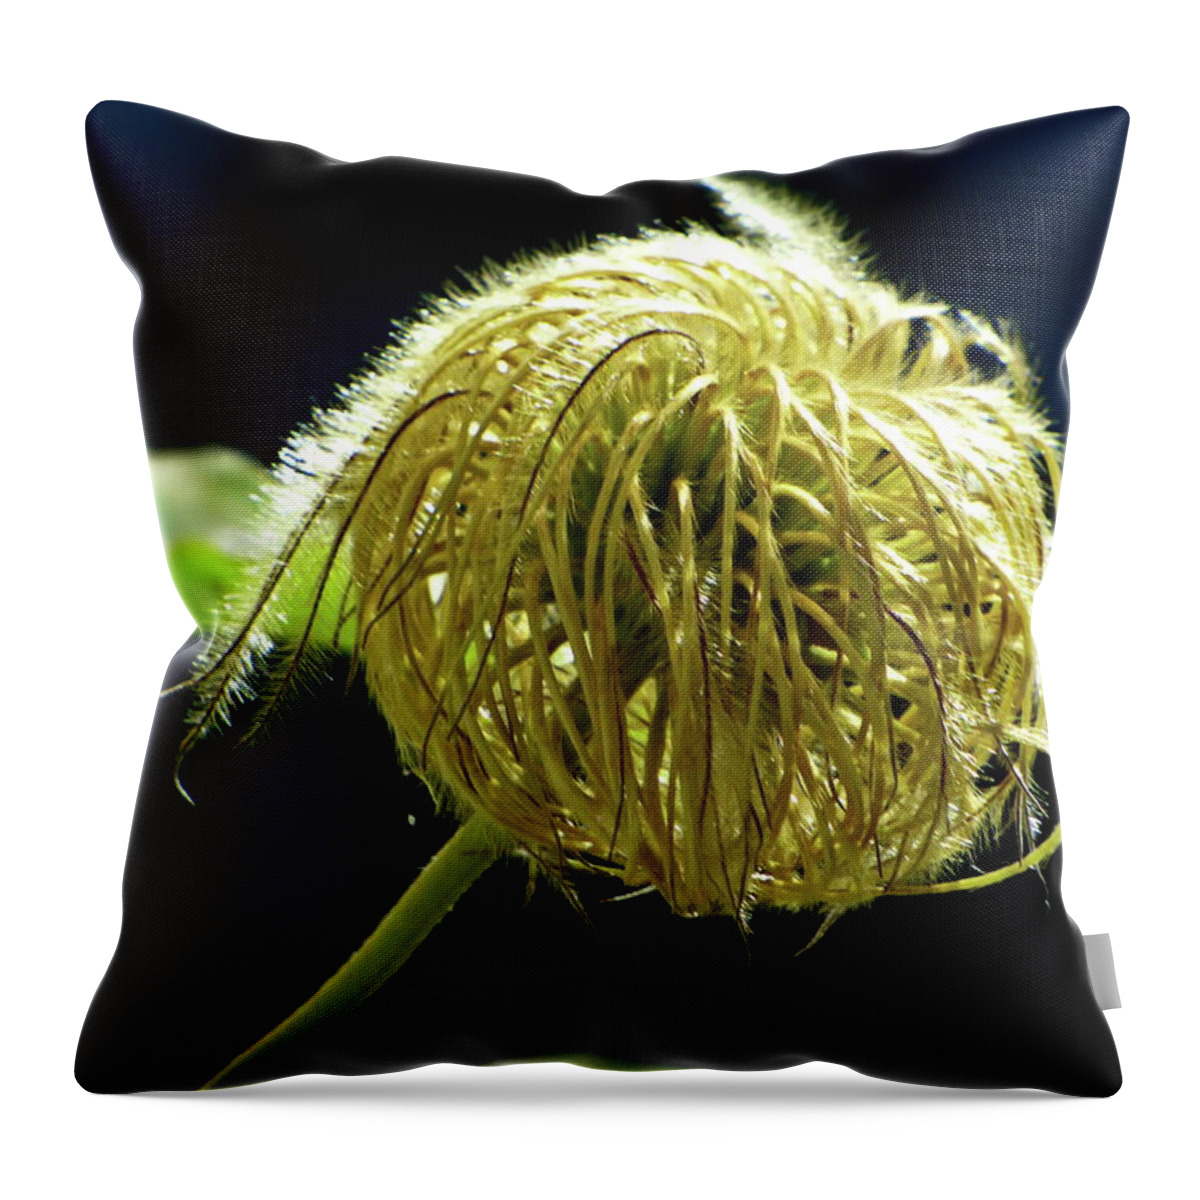 Clematis Throw Pillow featuring the photograph Clematis - Seed Head by Lyuba Filatova